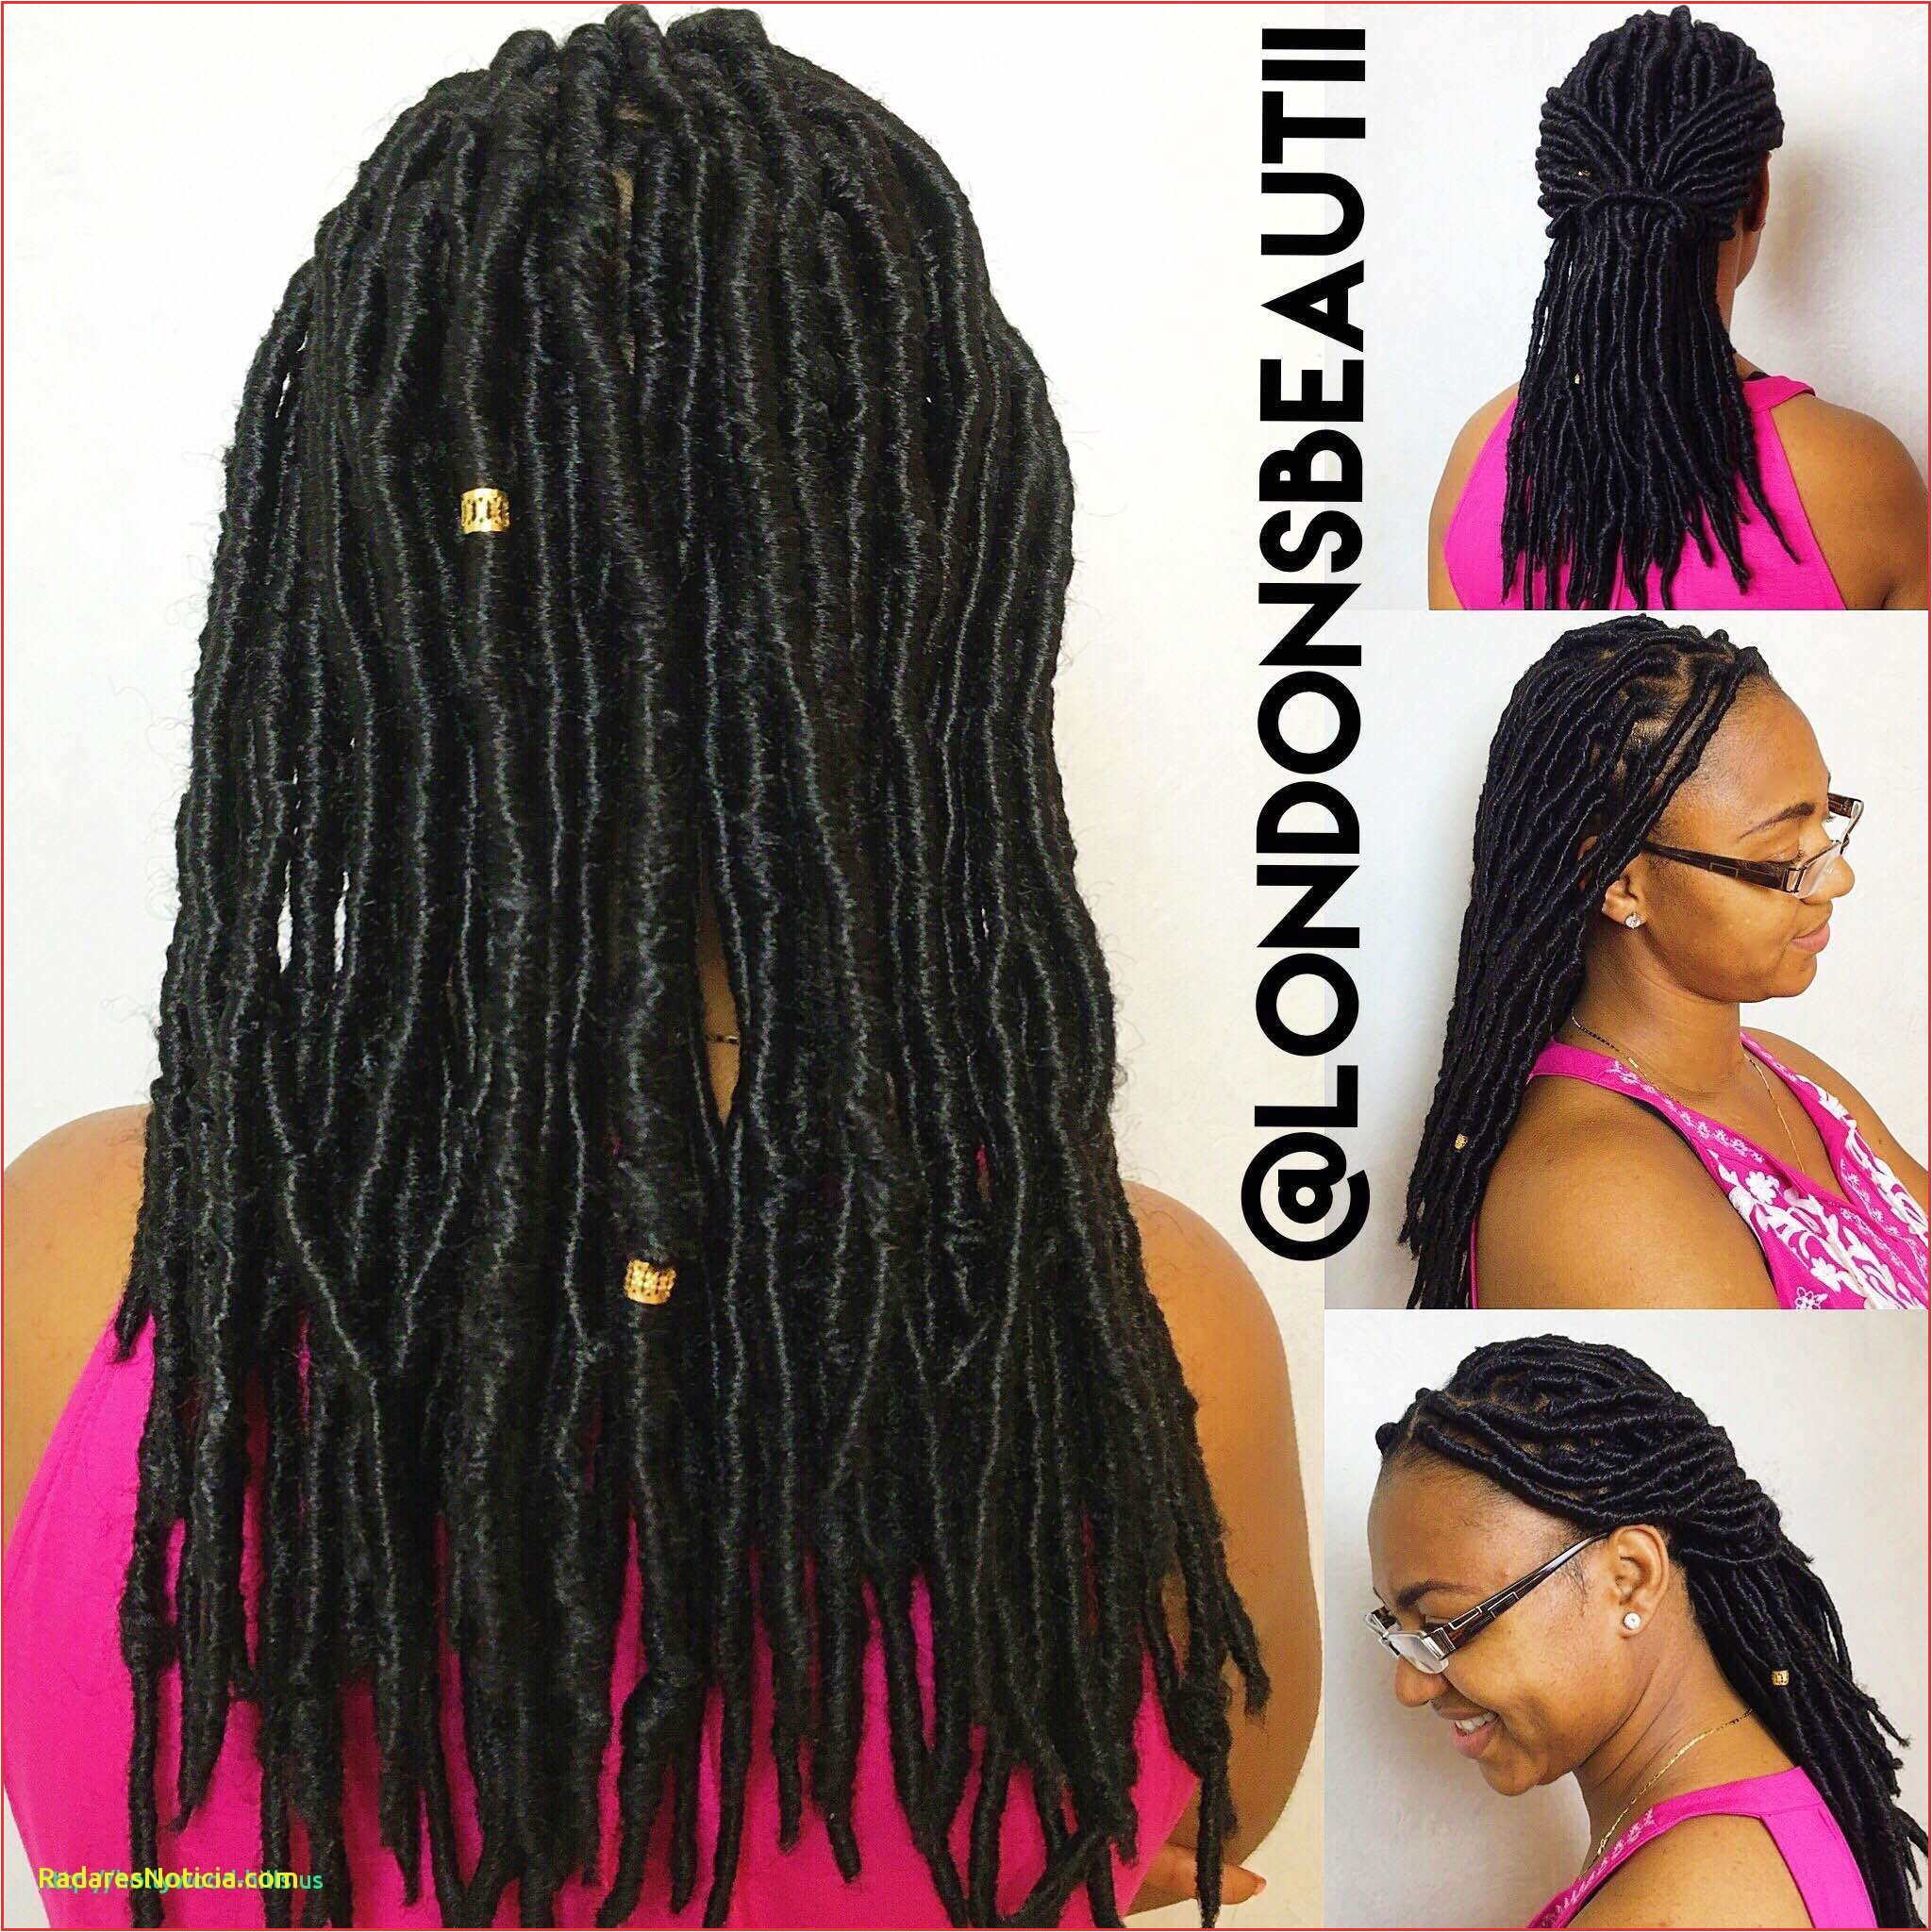 Hairstyle for Short Locs Inspirational Braided Dreads Hairstyles Hairstyle for Short Locs New